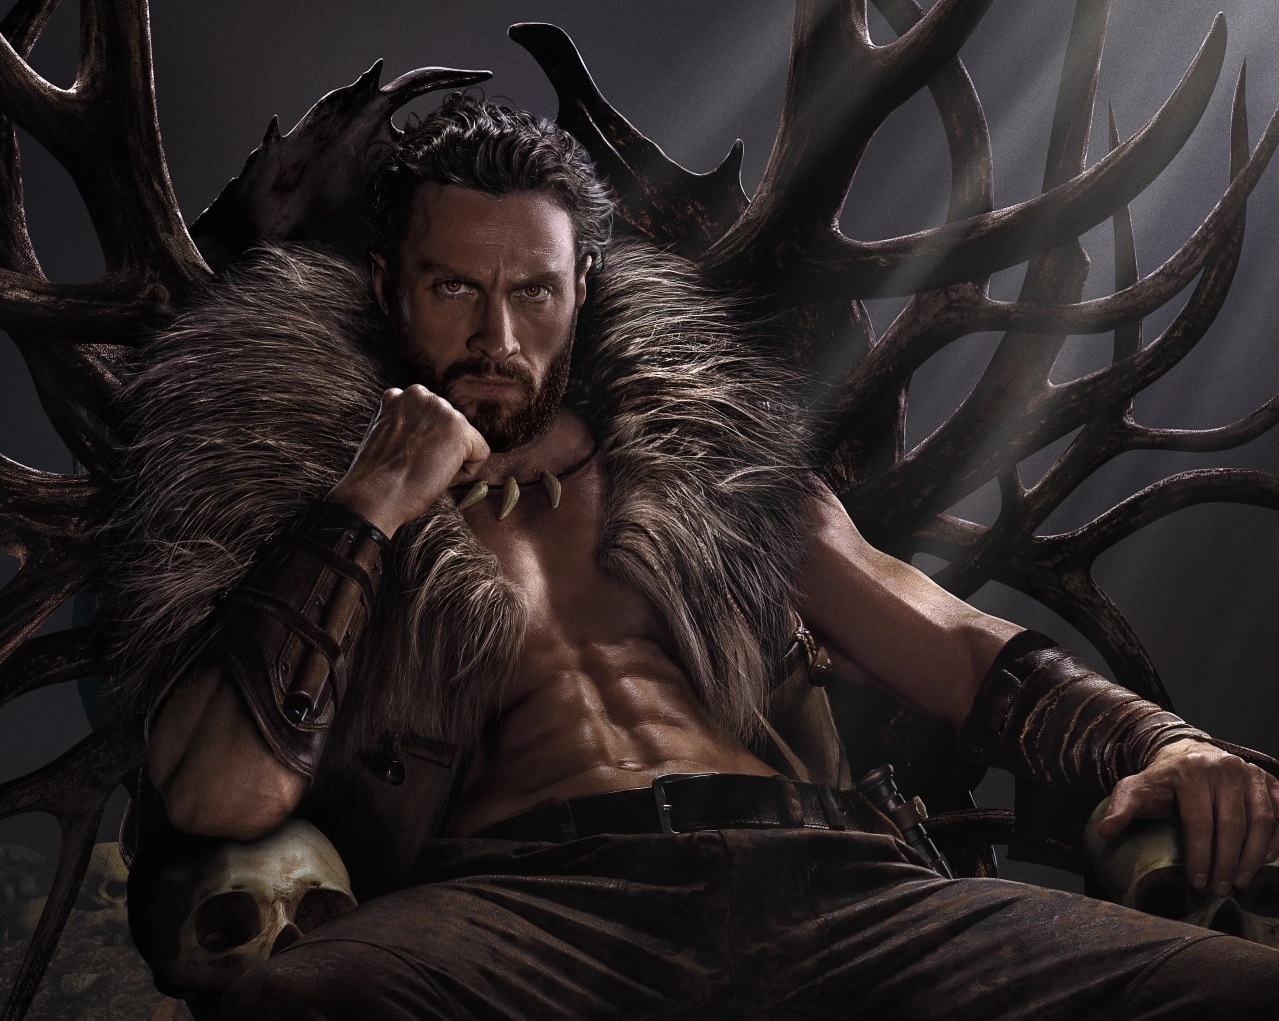 kraven the hunter trailer reveals first look at aaron taylor-johnson in starring role